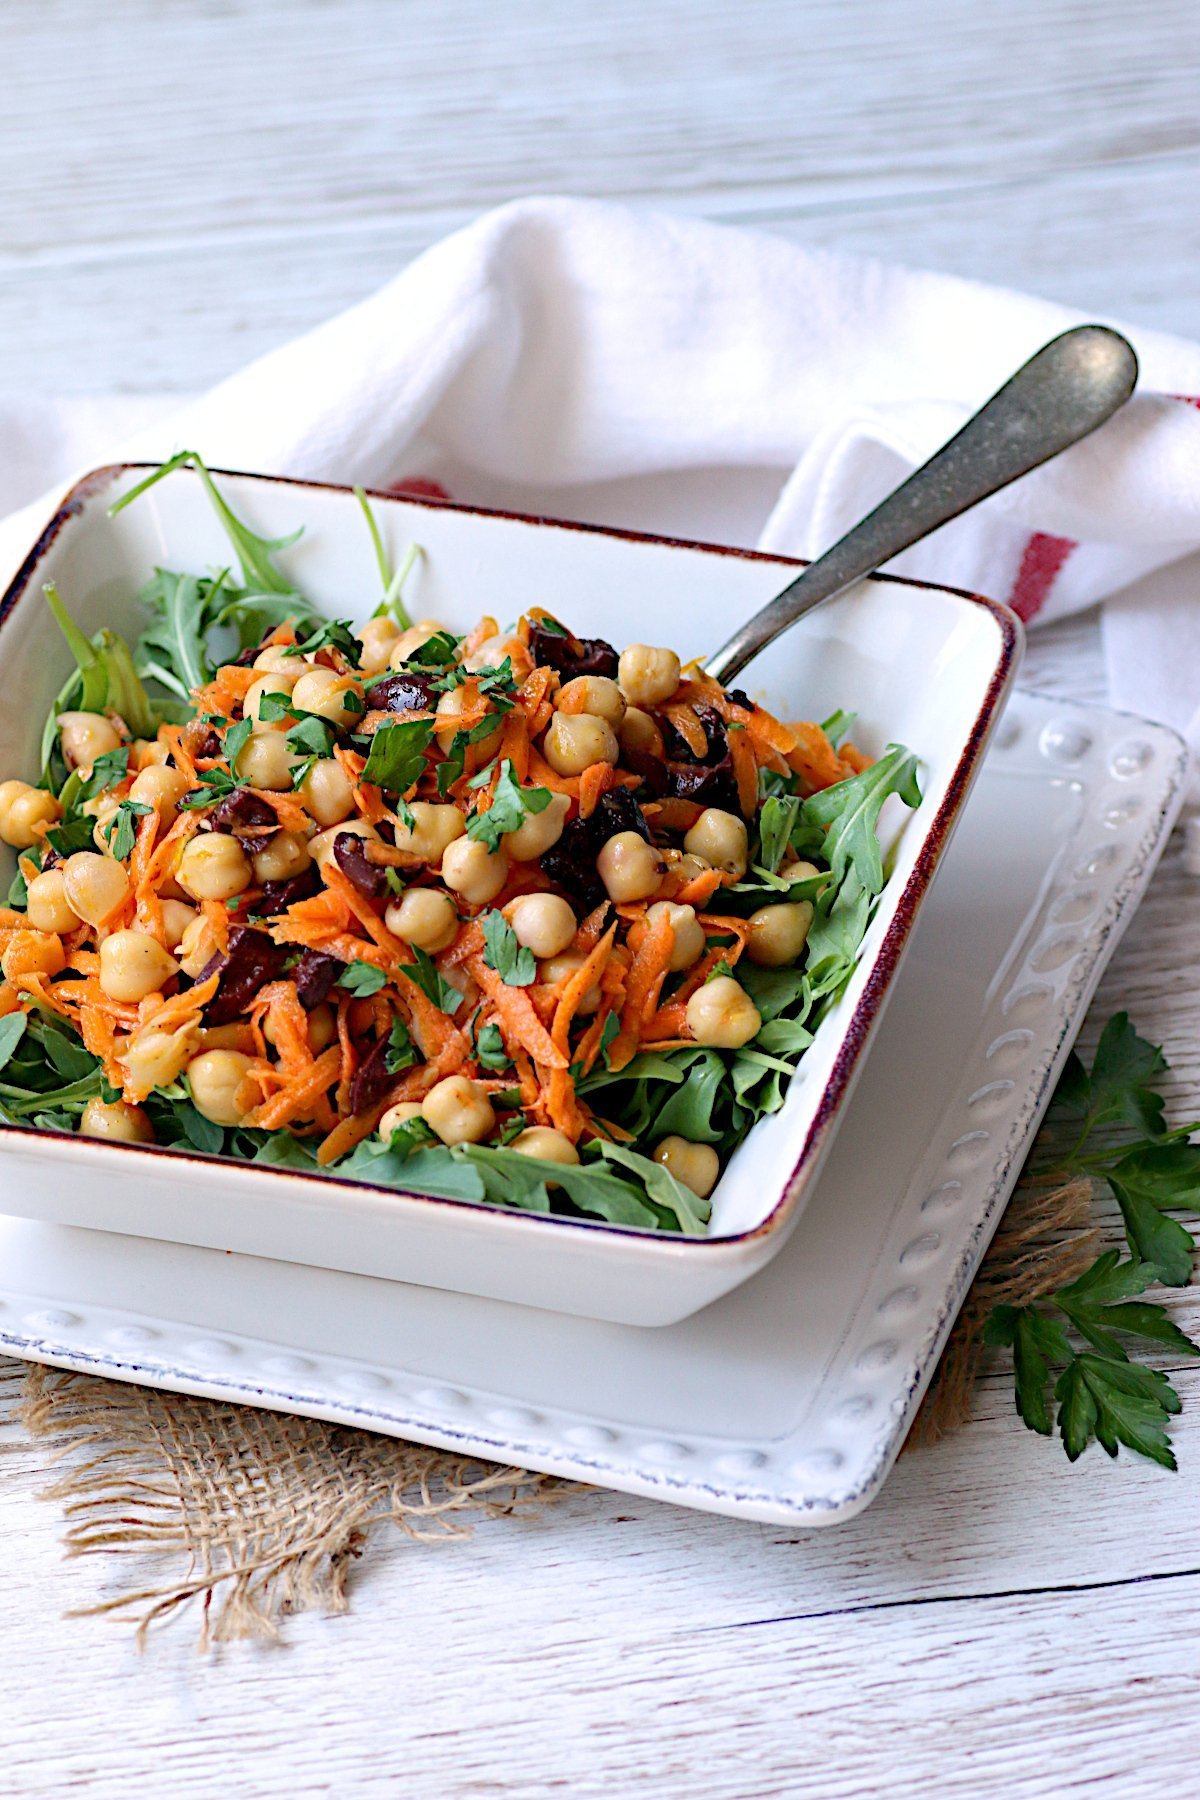 Chickpea salad with carrots and olives in a square, white bowl.